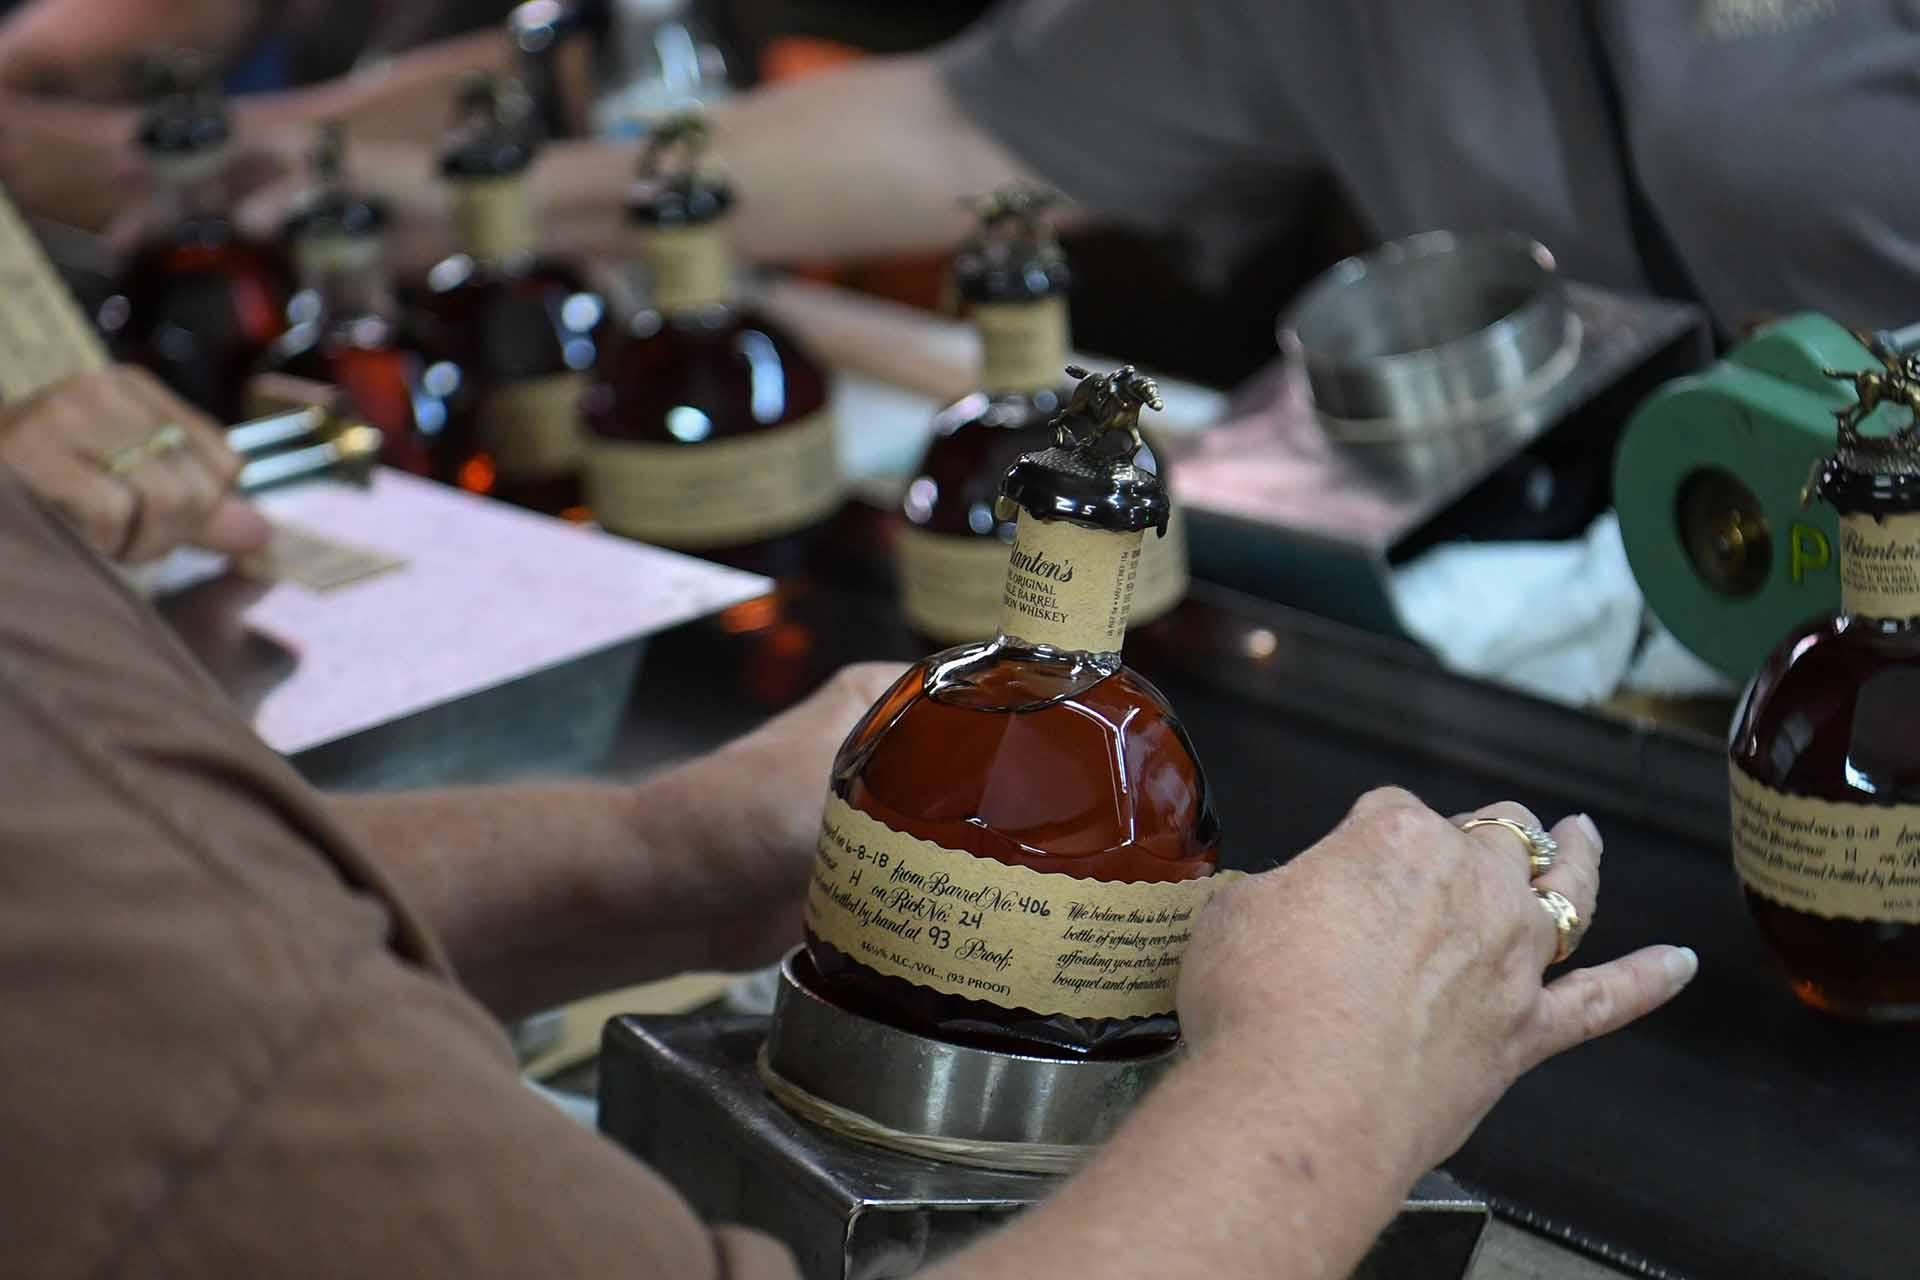 Allocated bourbon can be difficult to find. Worker prepares it in factory.